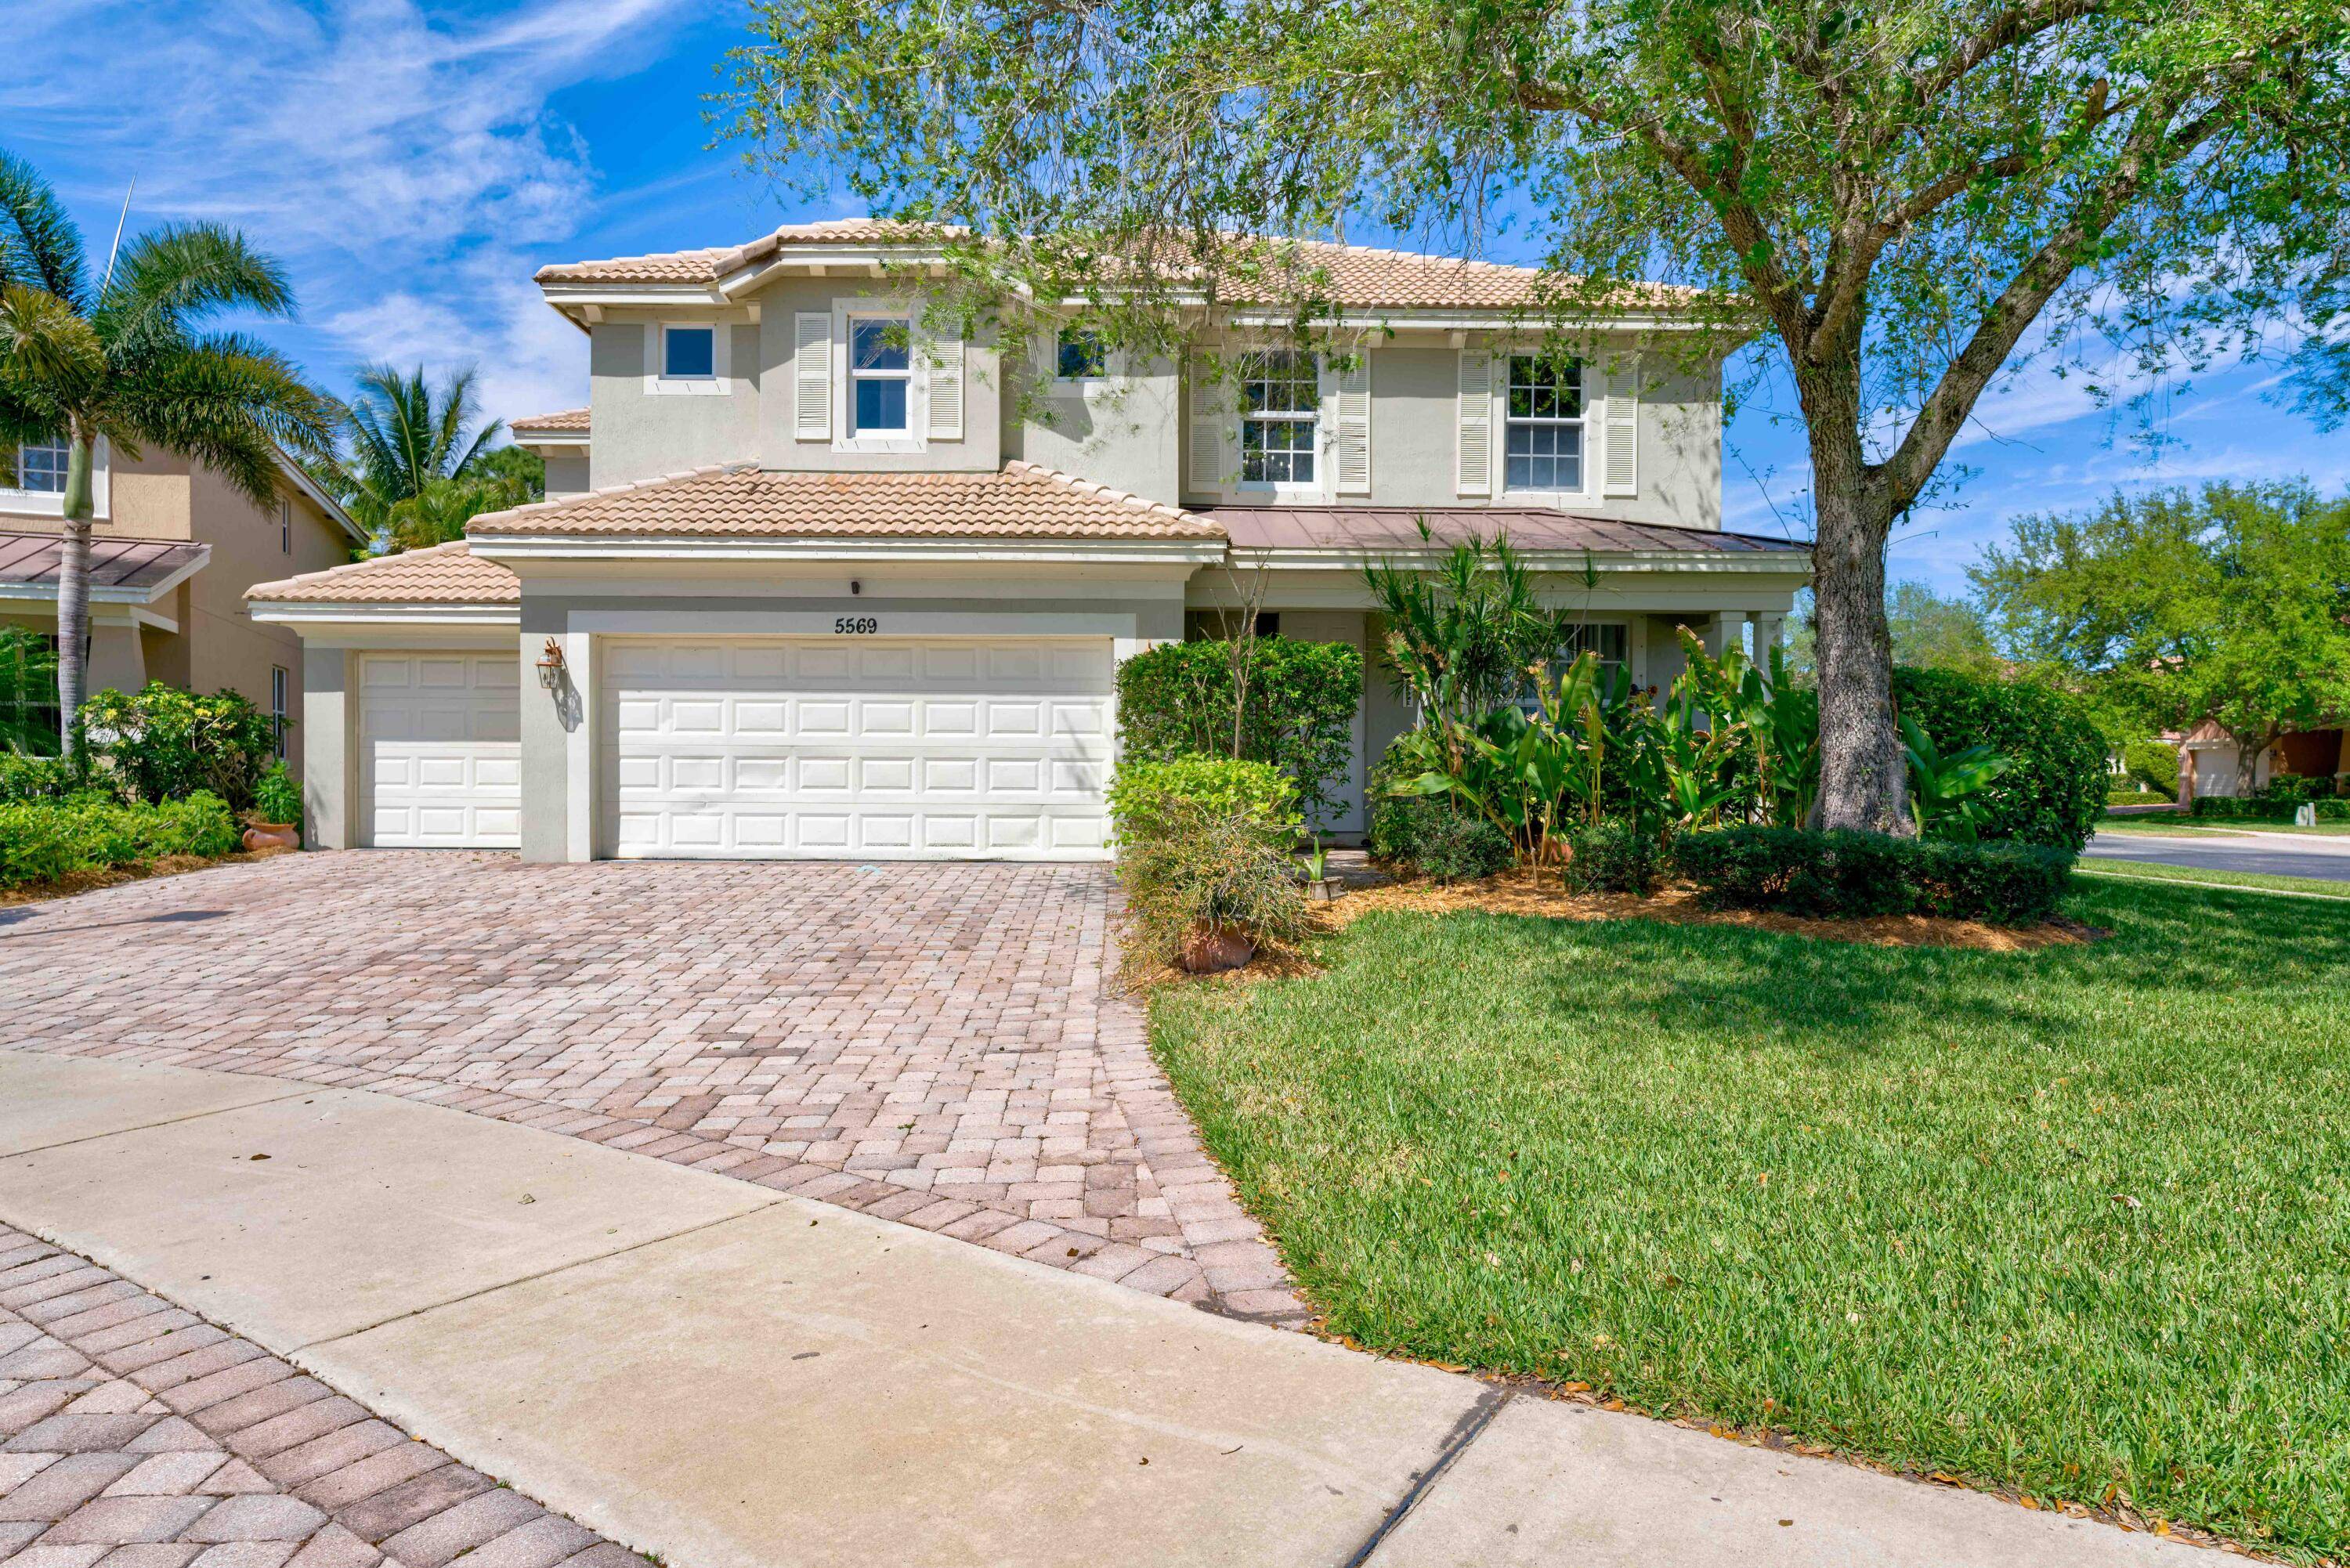 Offered for the first time by original owner, Exceptional Living in Gated Community, The Oaks.